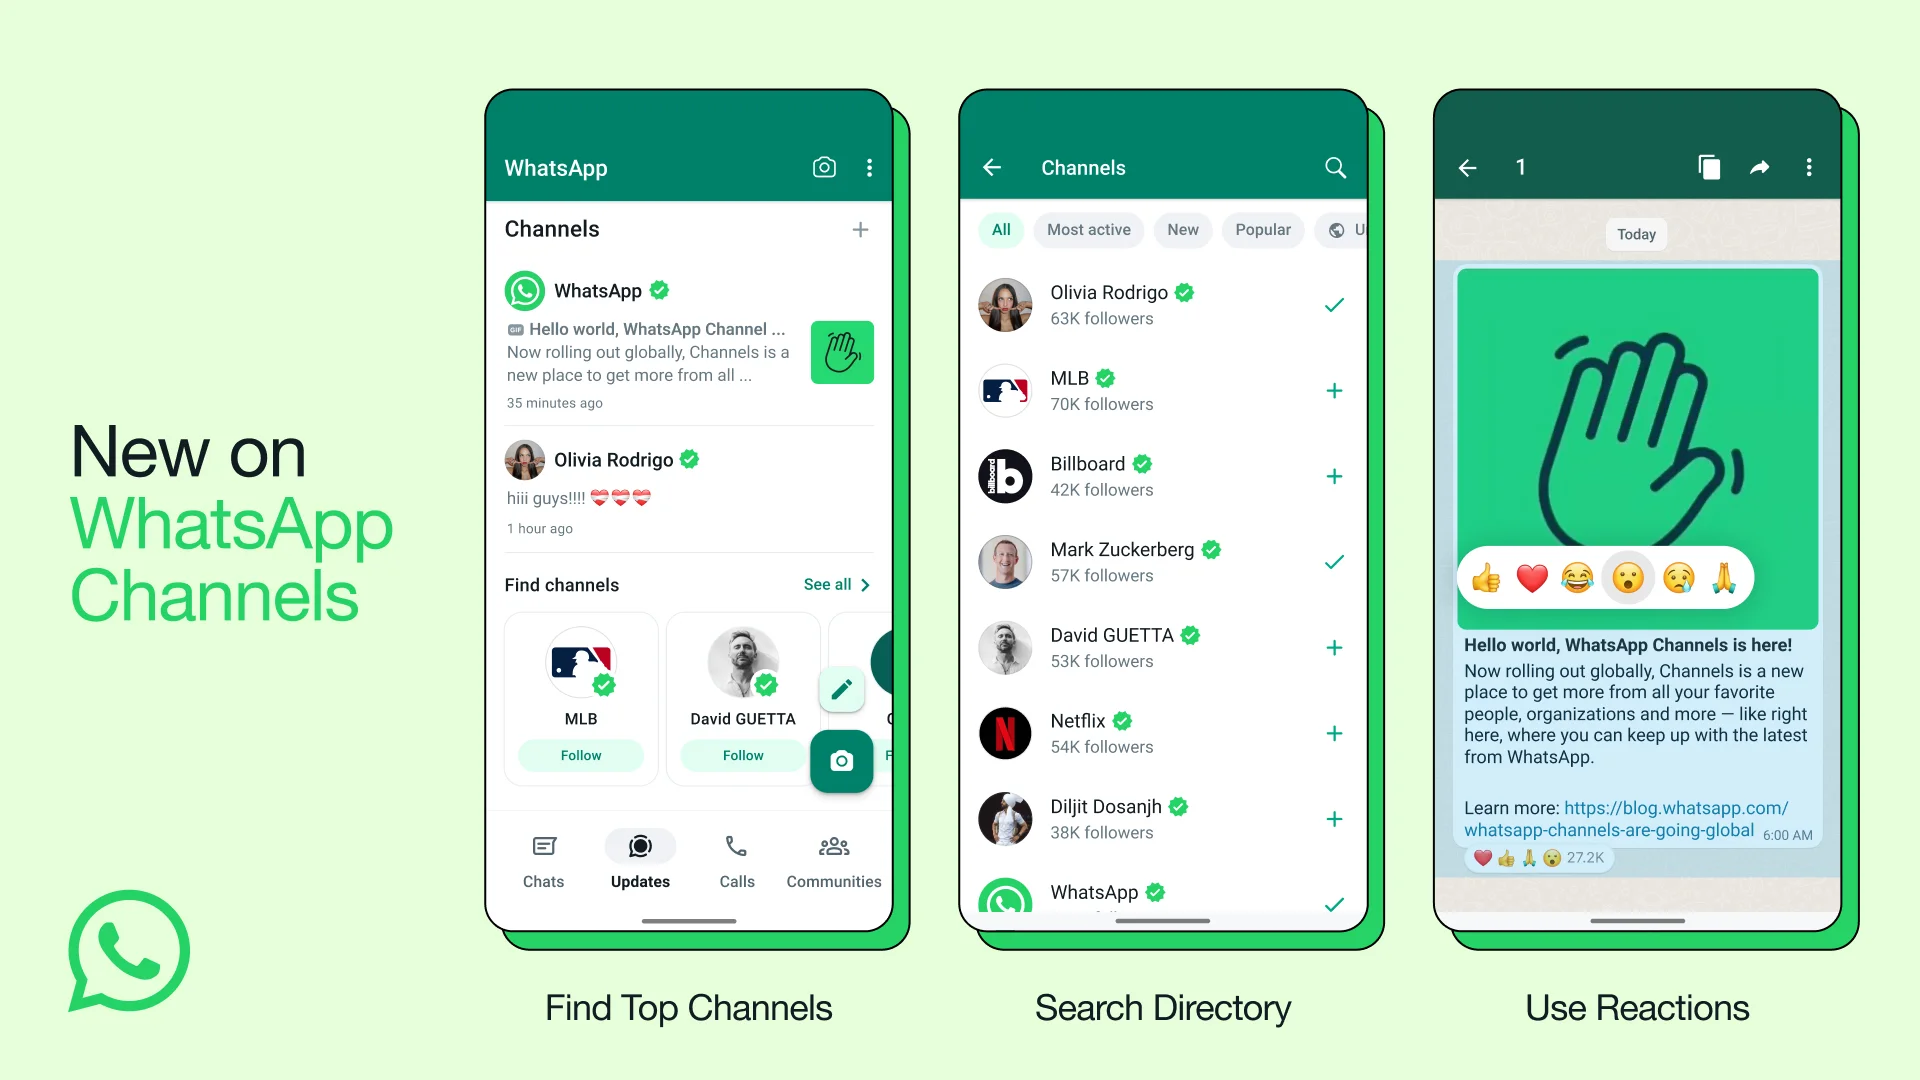 WhatsApp Channels Social 1 - Users can now use WhatsApp channels which is available in 150 countries